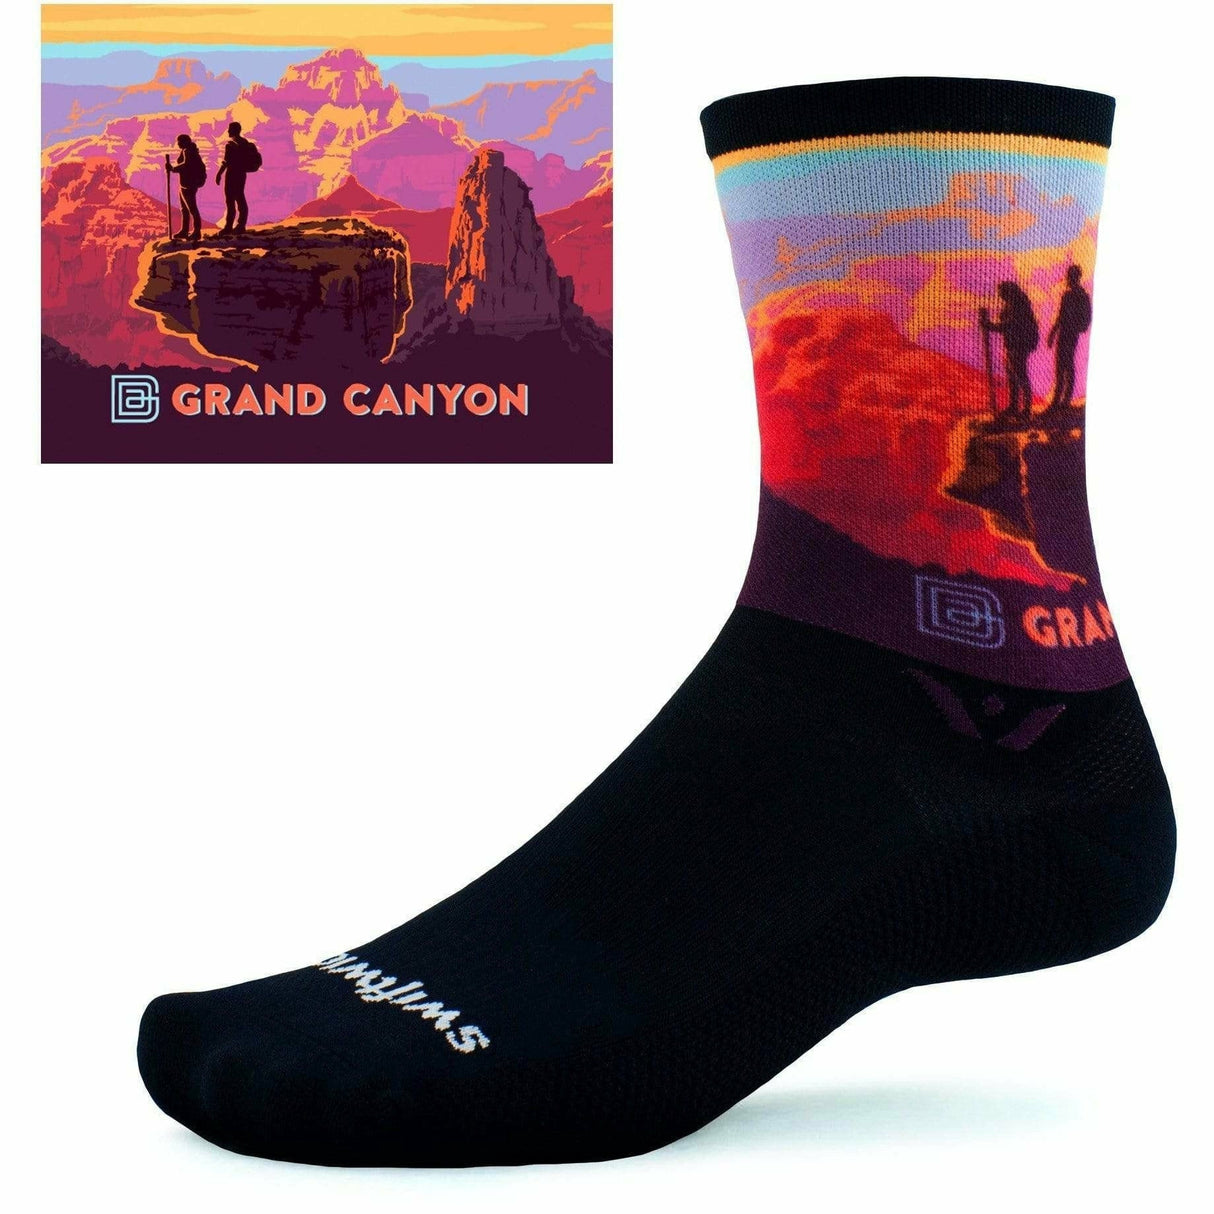 Swiftwick Vision Six Impression National Parks Collection Crew Socks  -  Small / Grand Canyon Lookout